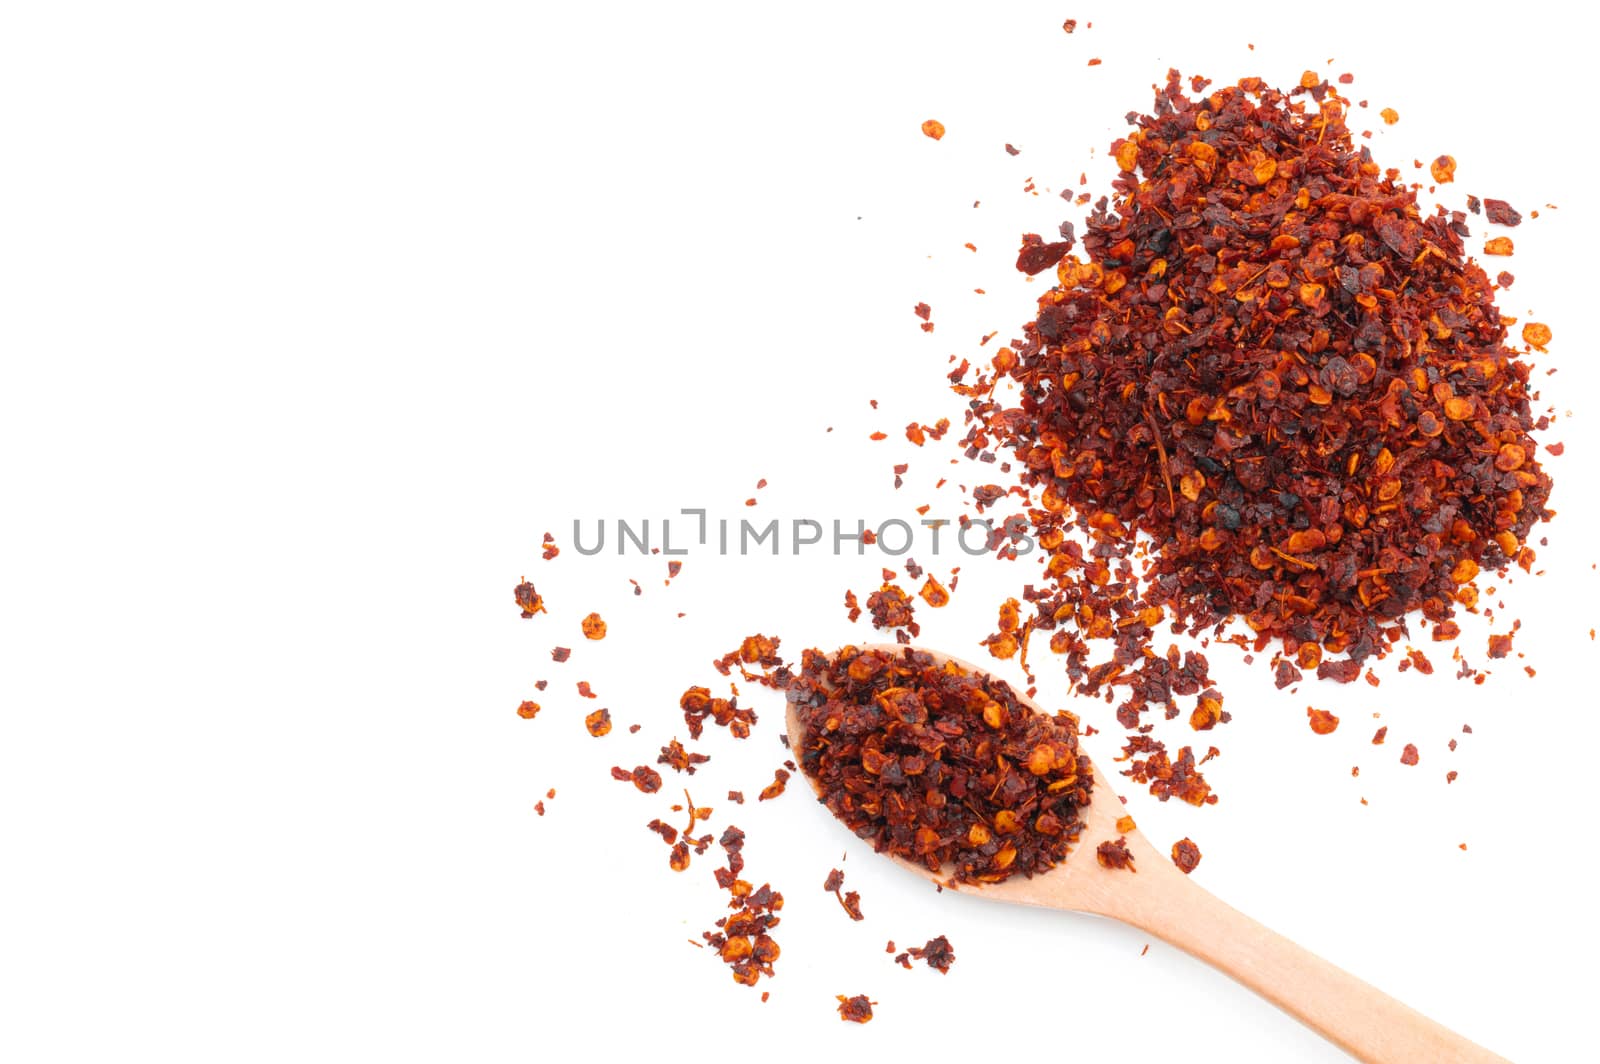 Dried chili meal on a white background